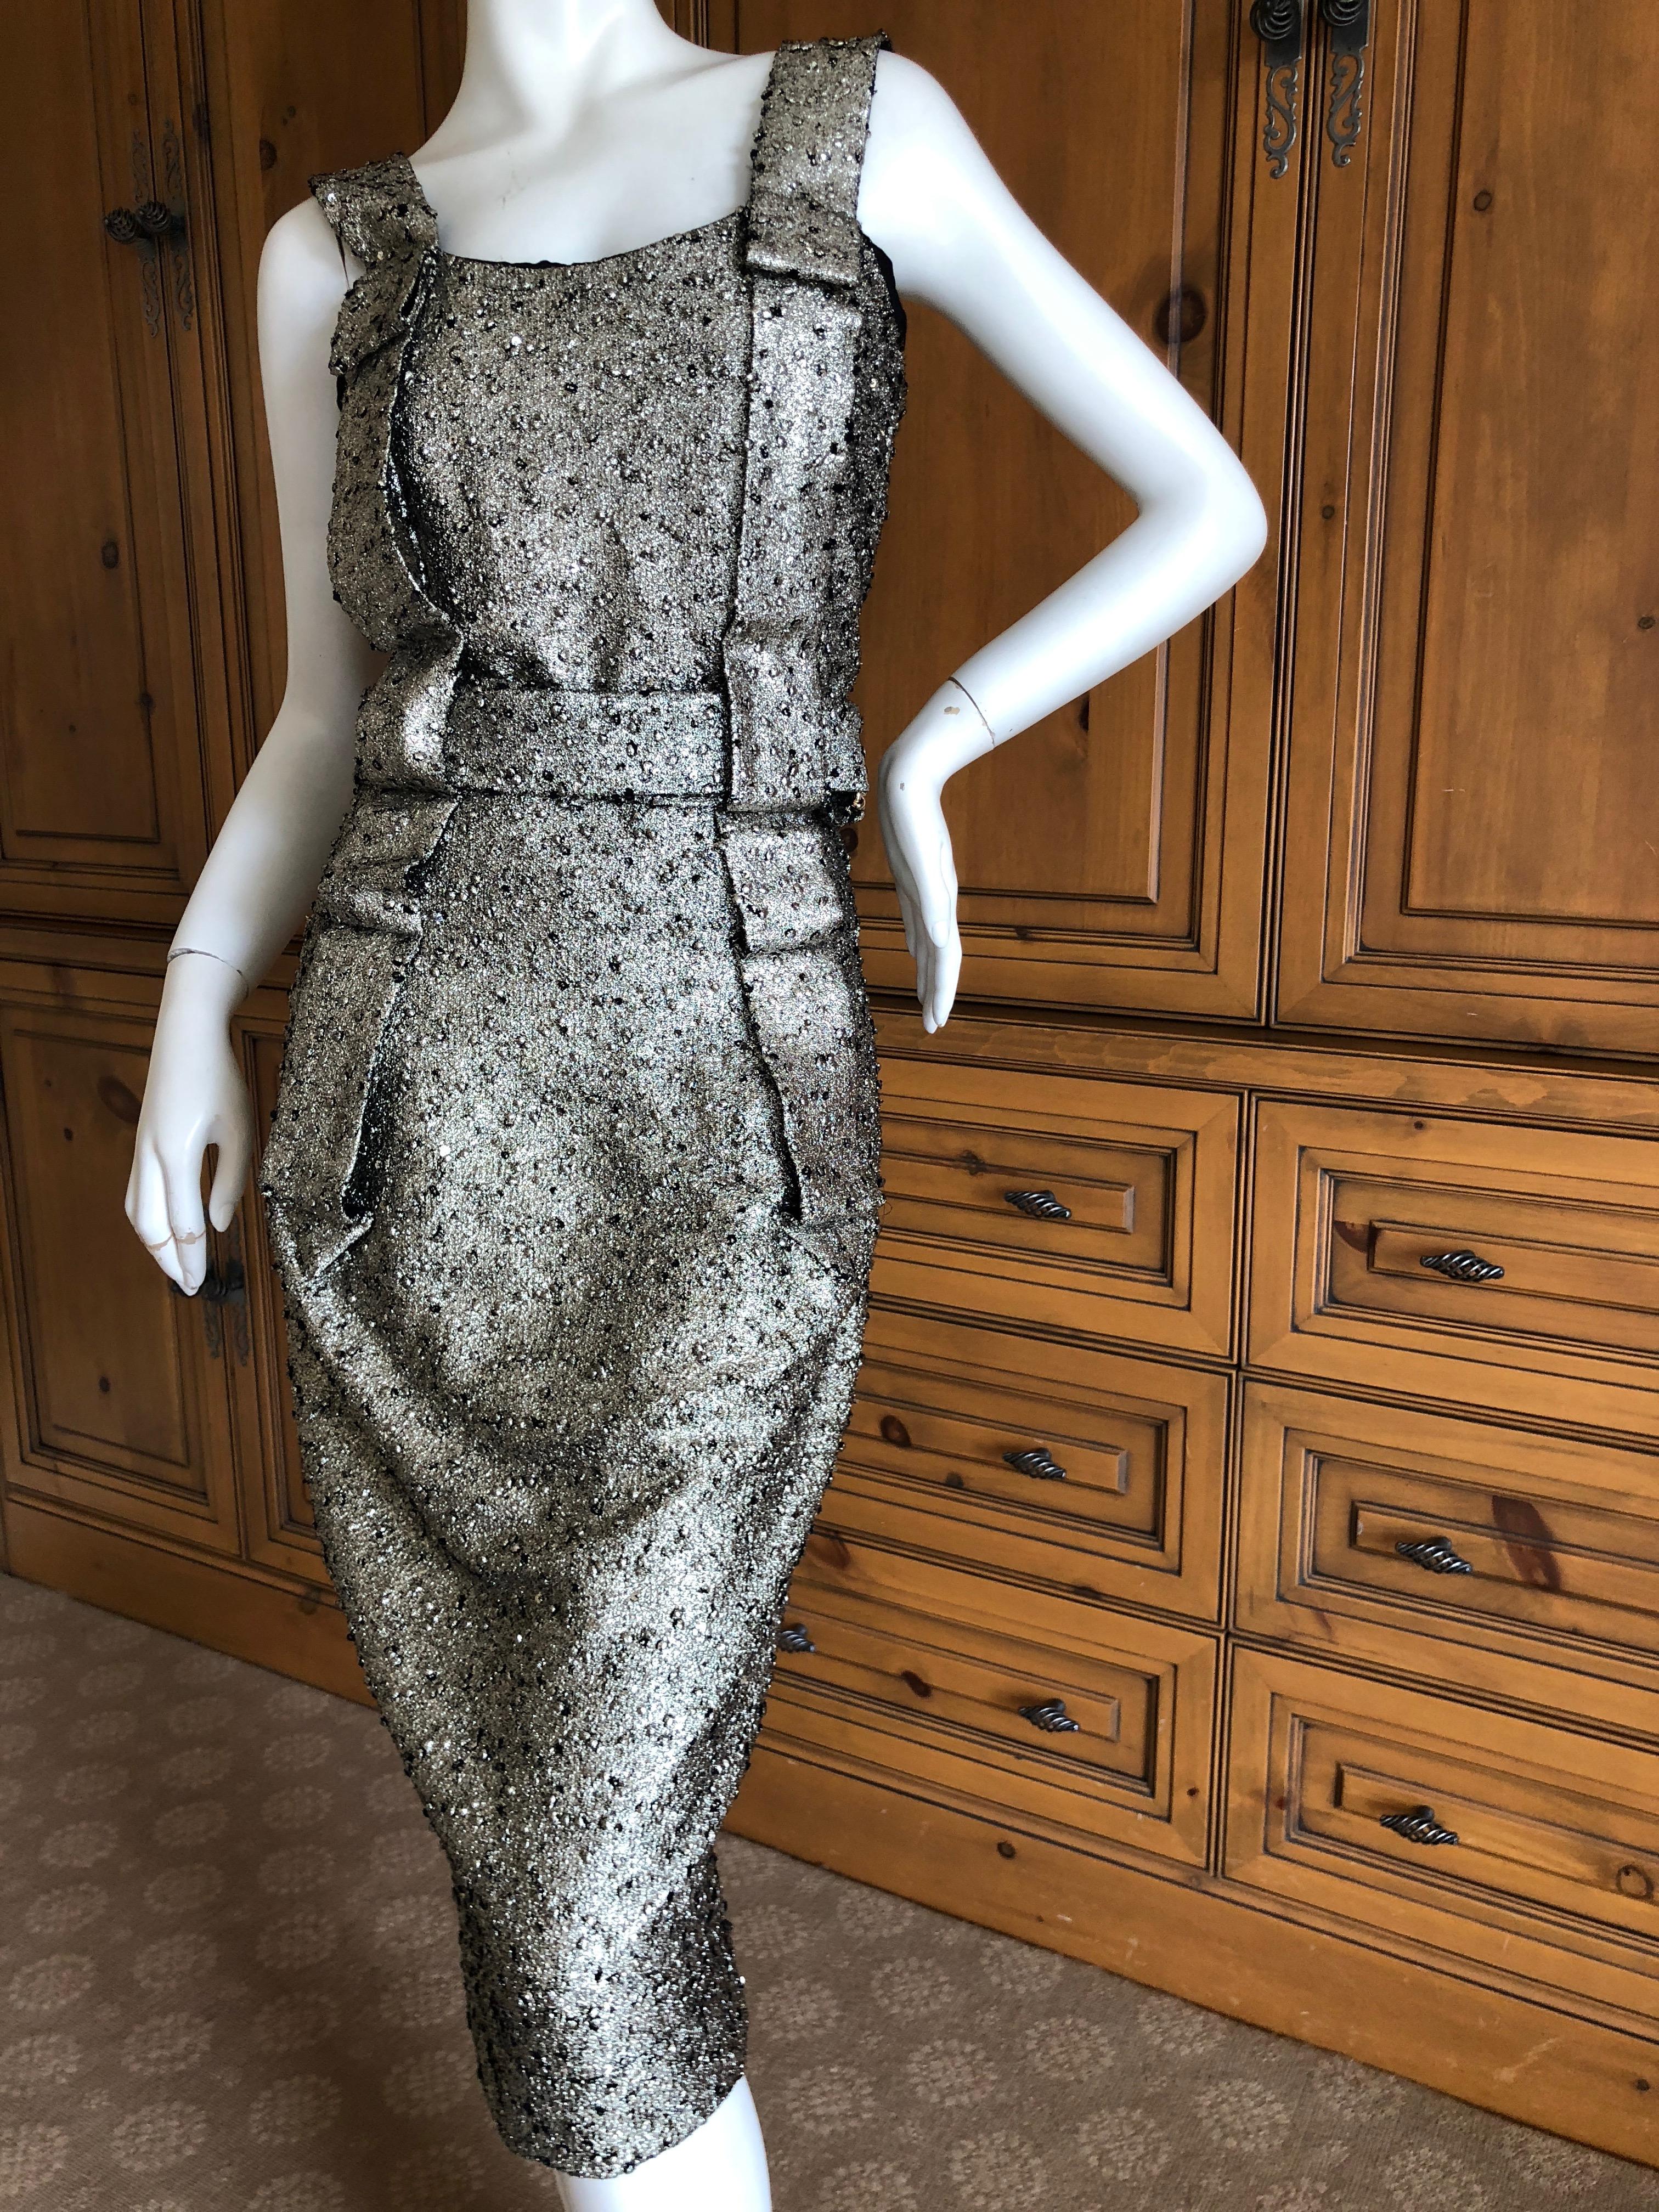 Vivienne Westwood Anglomania 2011 Glittery Silver Cocktail Dress  1